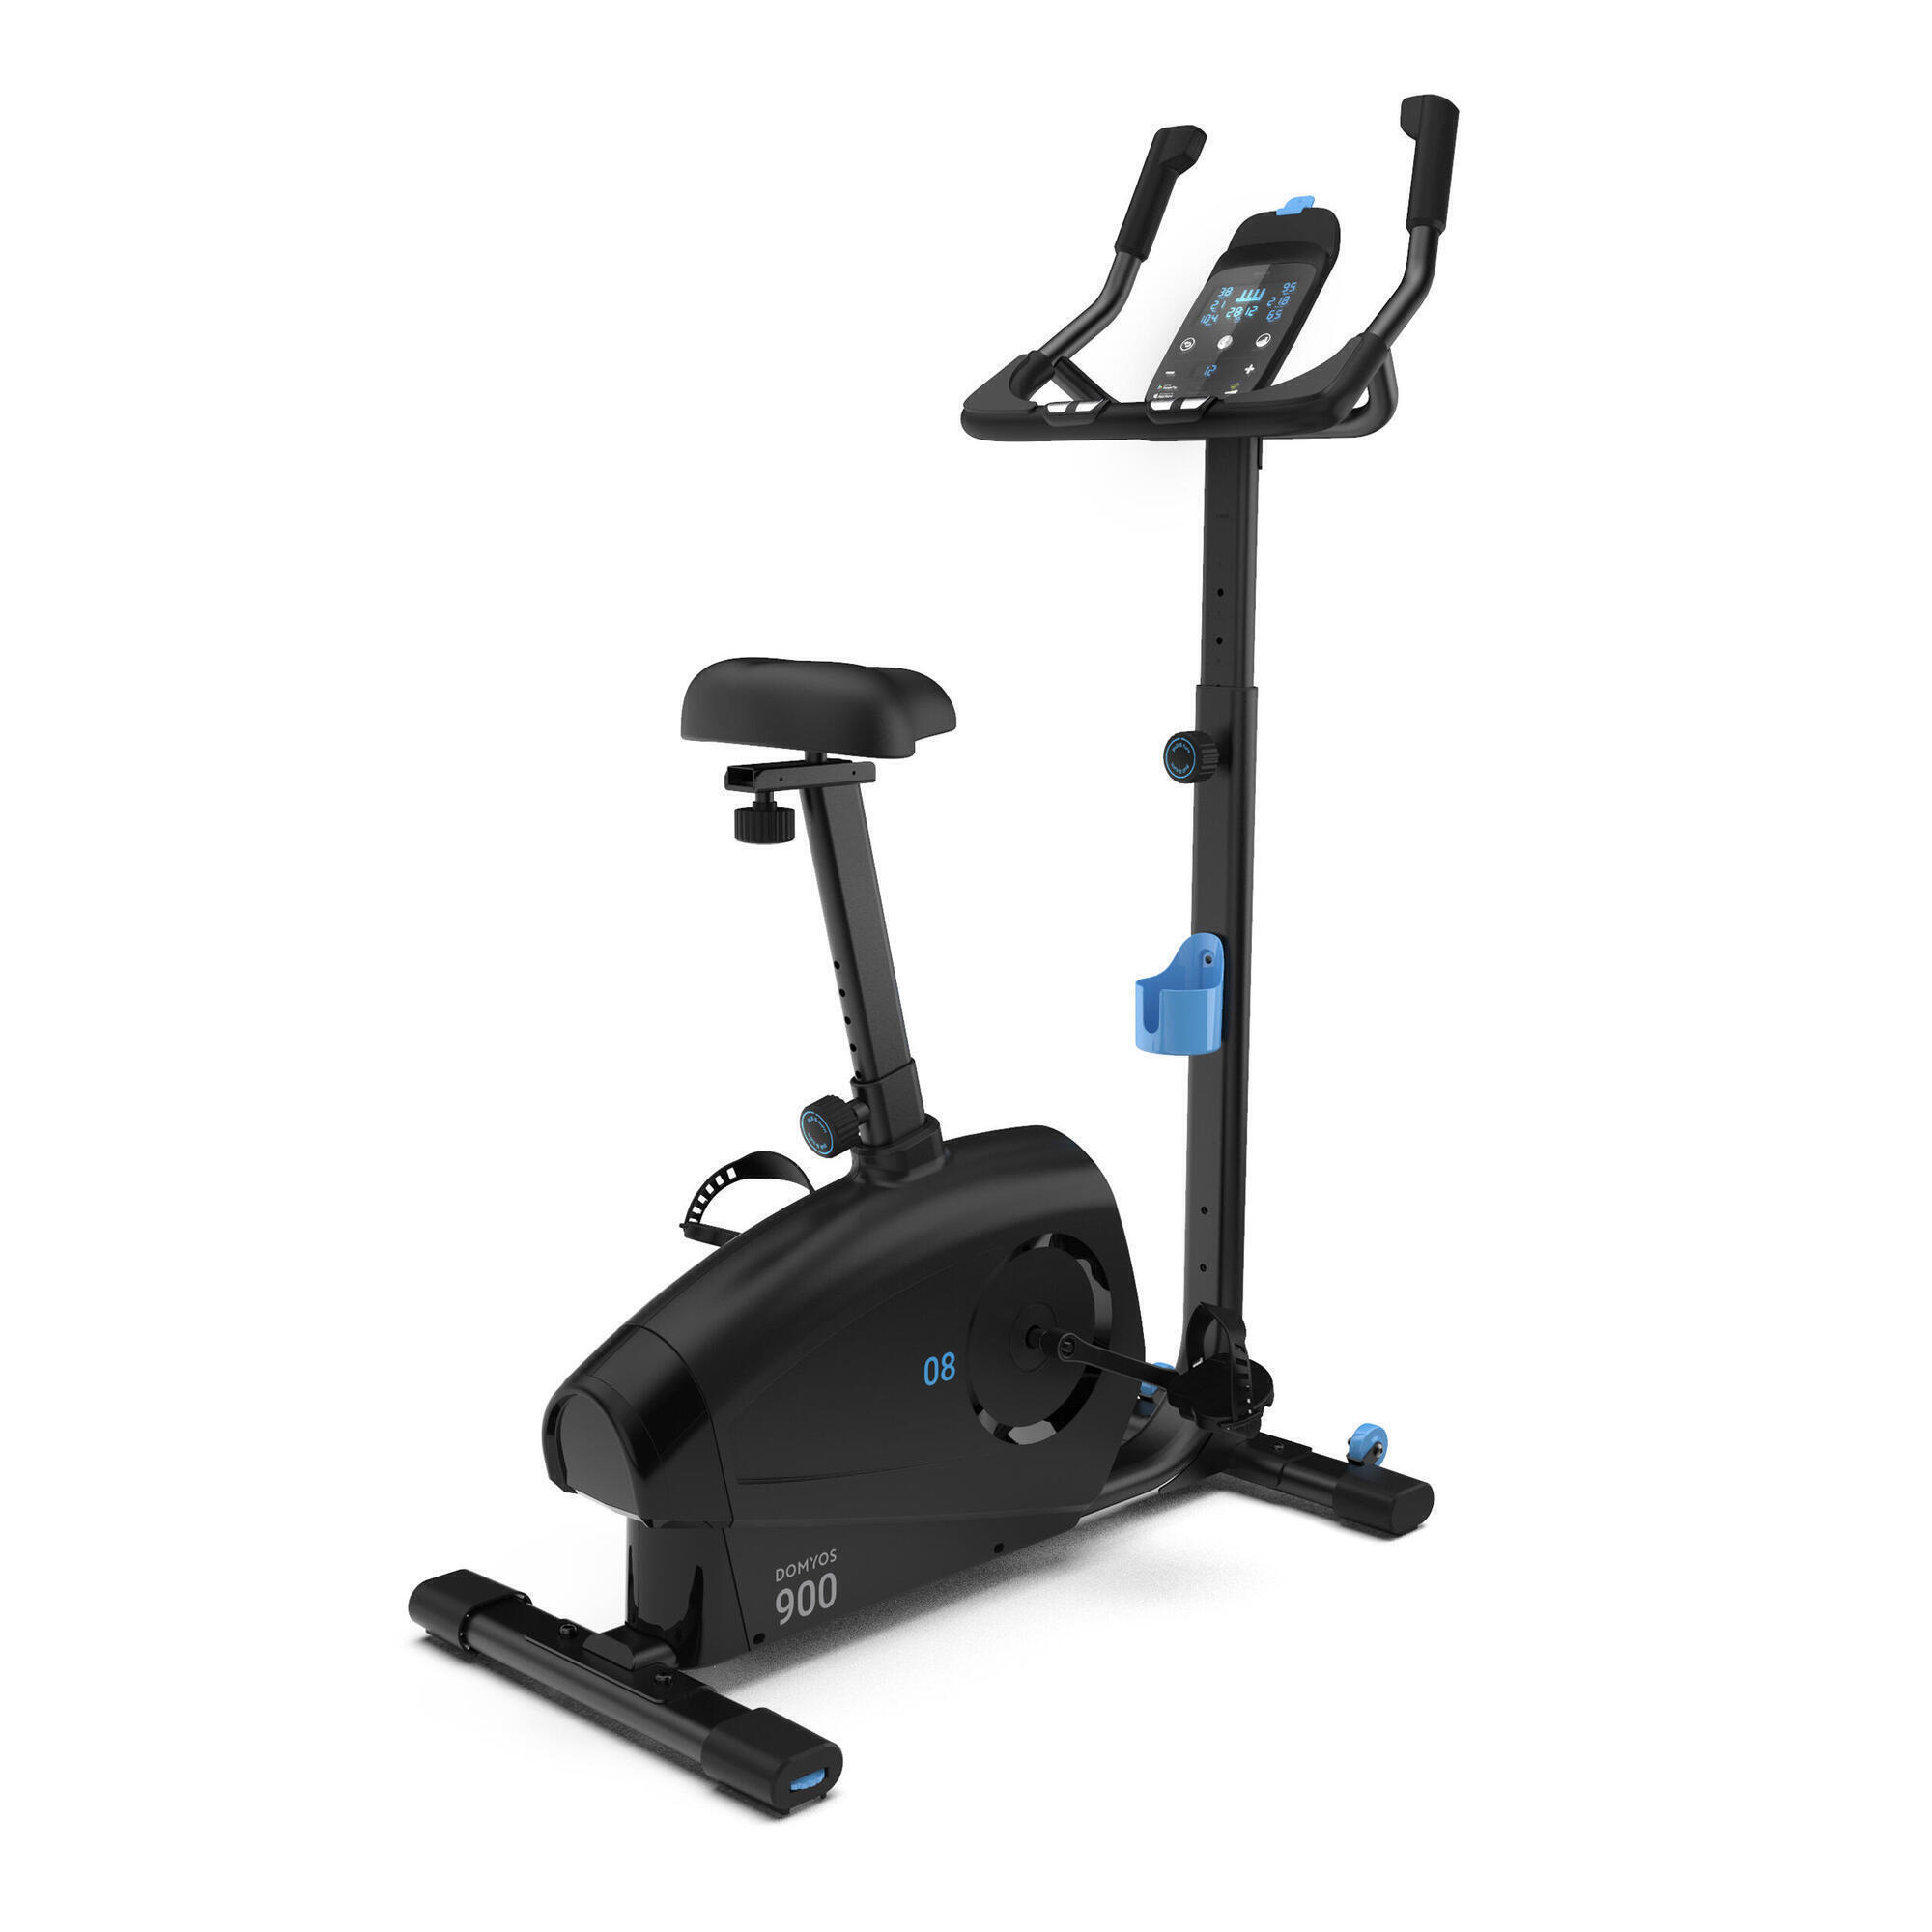 DOMYOS Refurbished Self-Powered Exercise Bike 900 Connected to Coaching Apps - C Grade